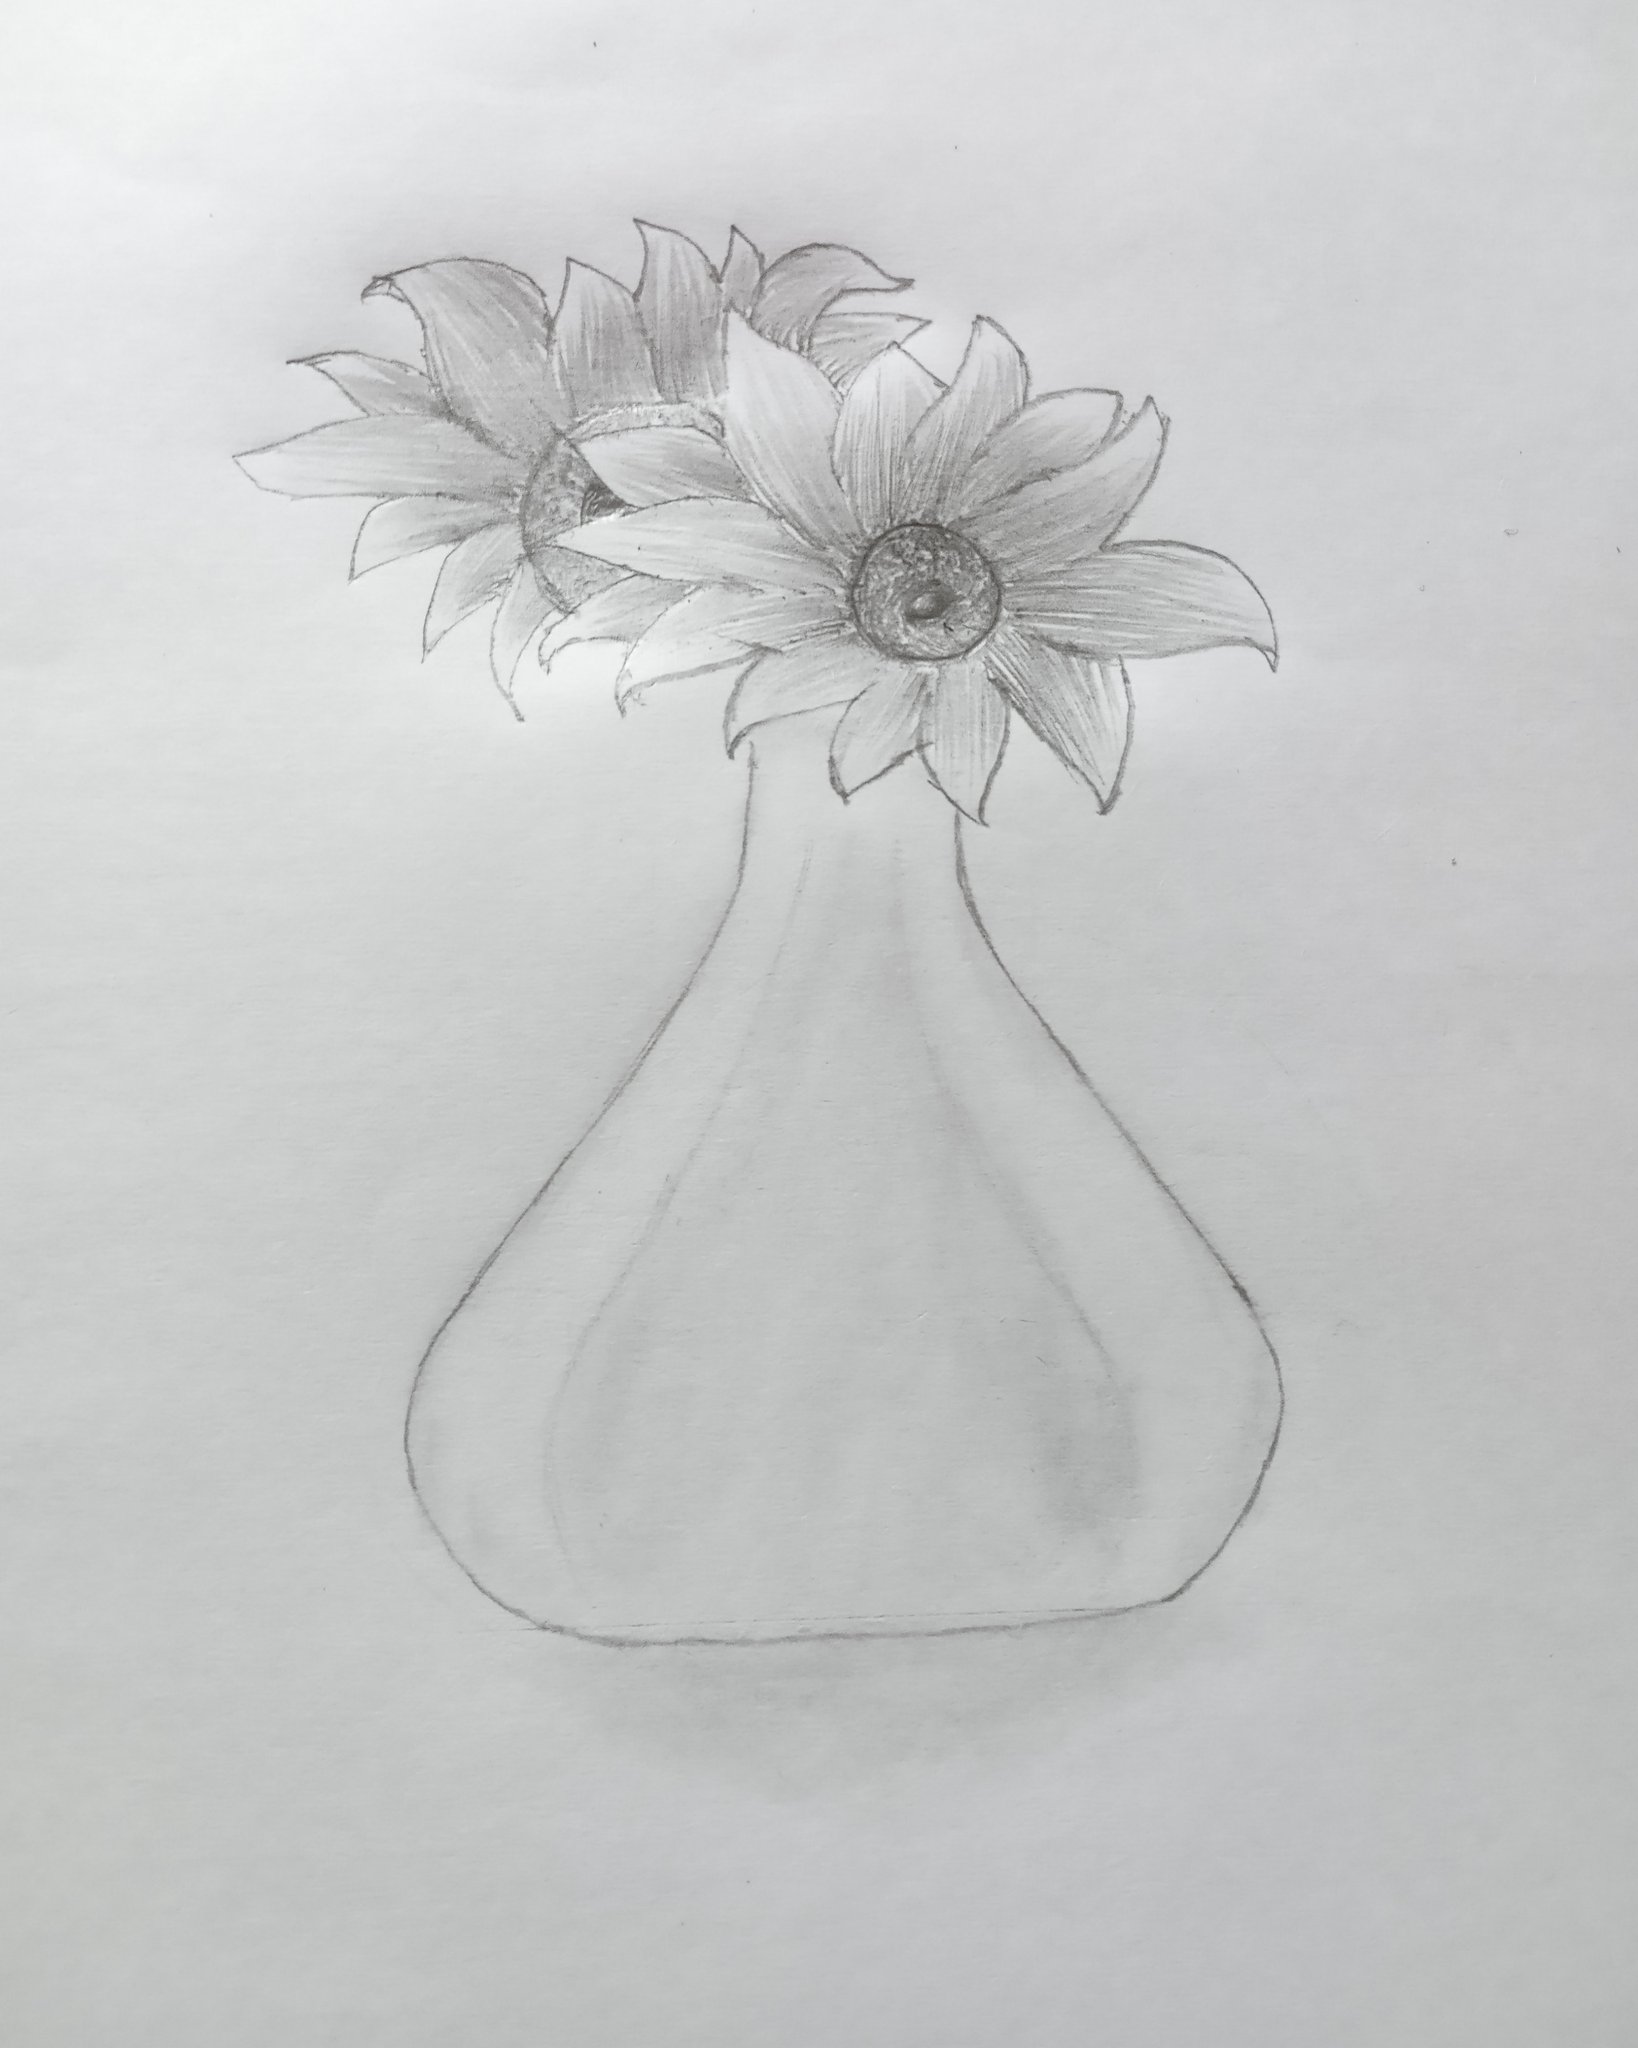 The flower in the vase smiles but no longer laughs  Flower sketch pencil  Pencil drawings of flowers Flower vase drawing